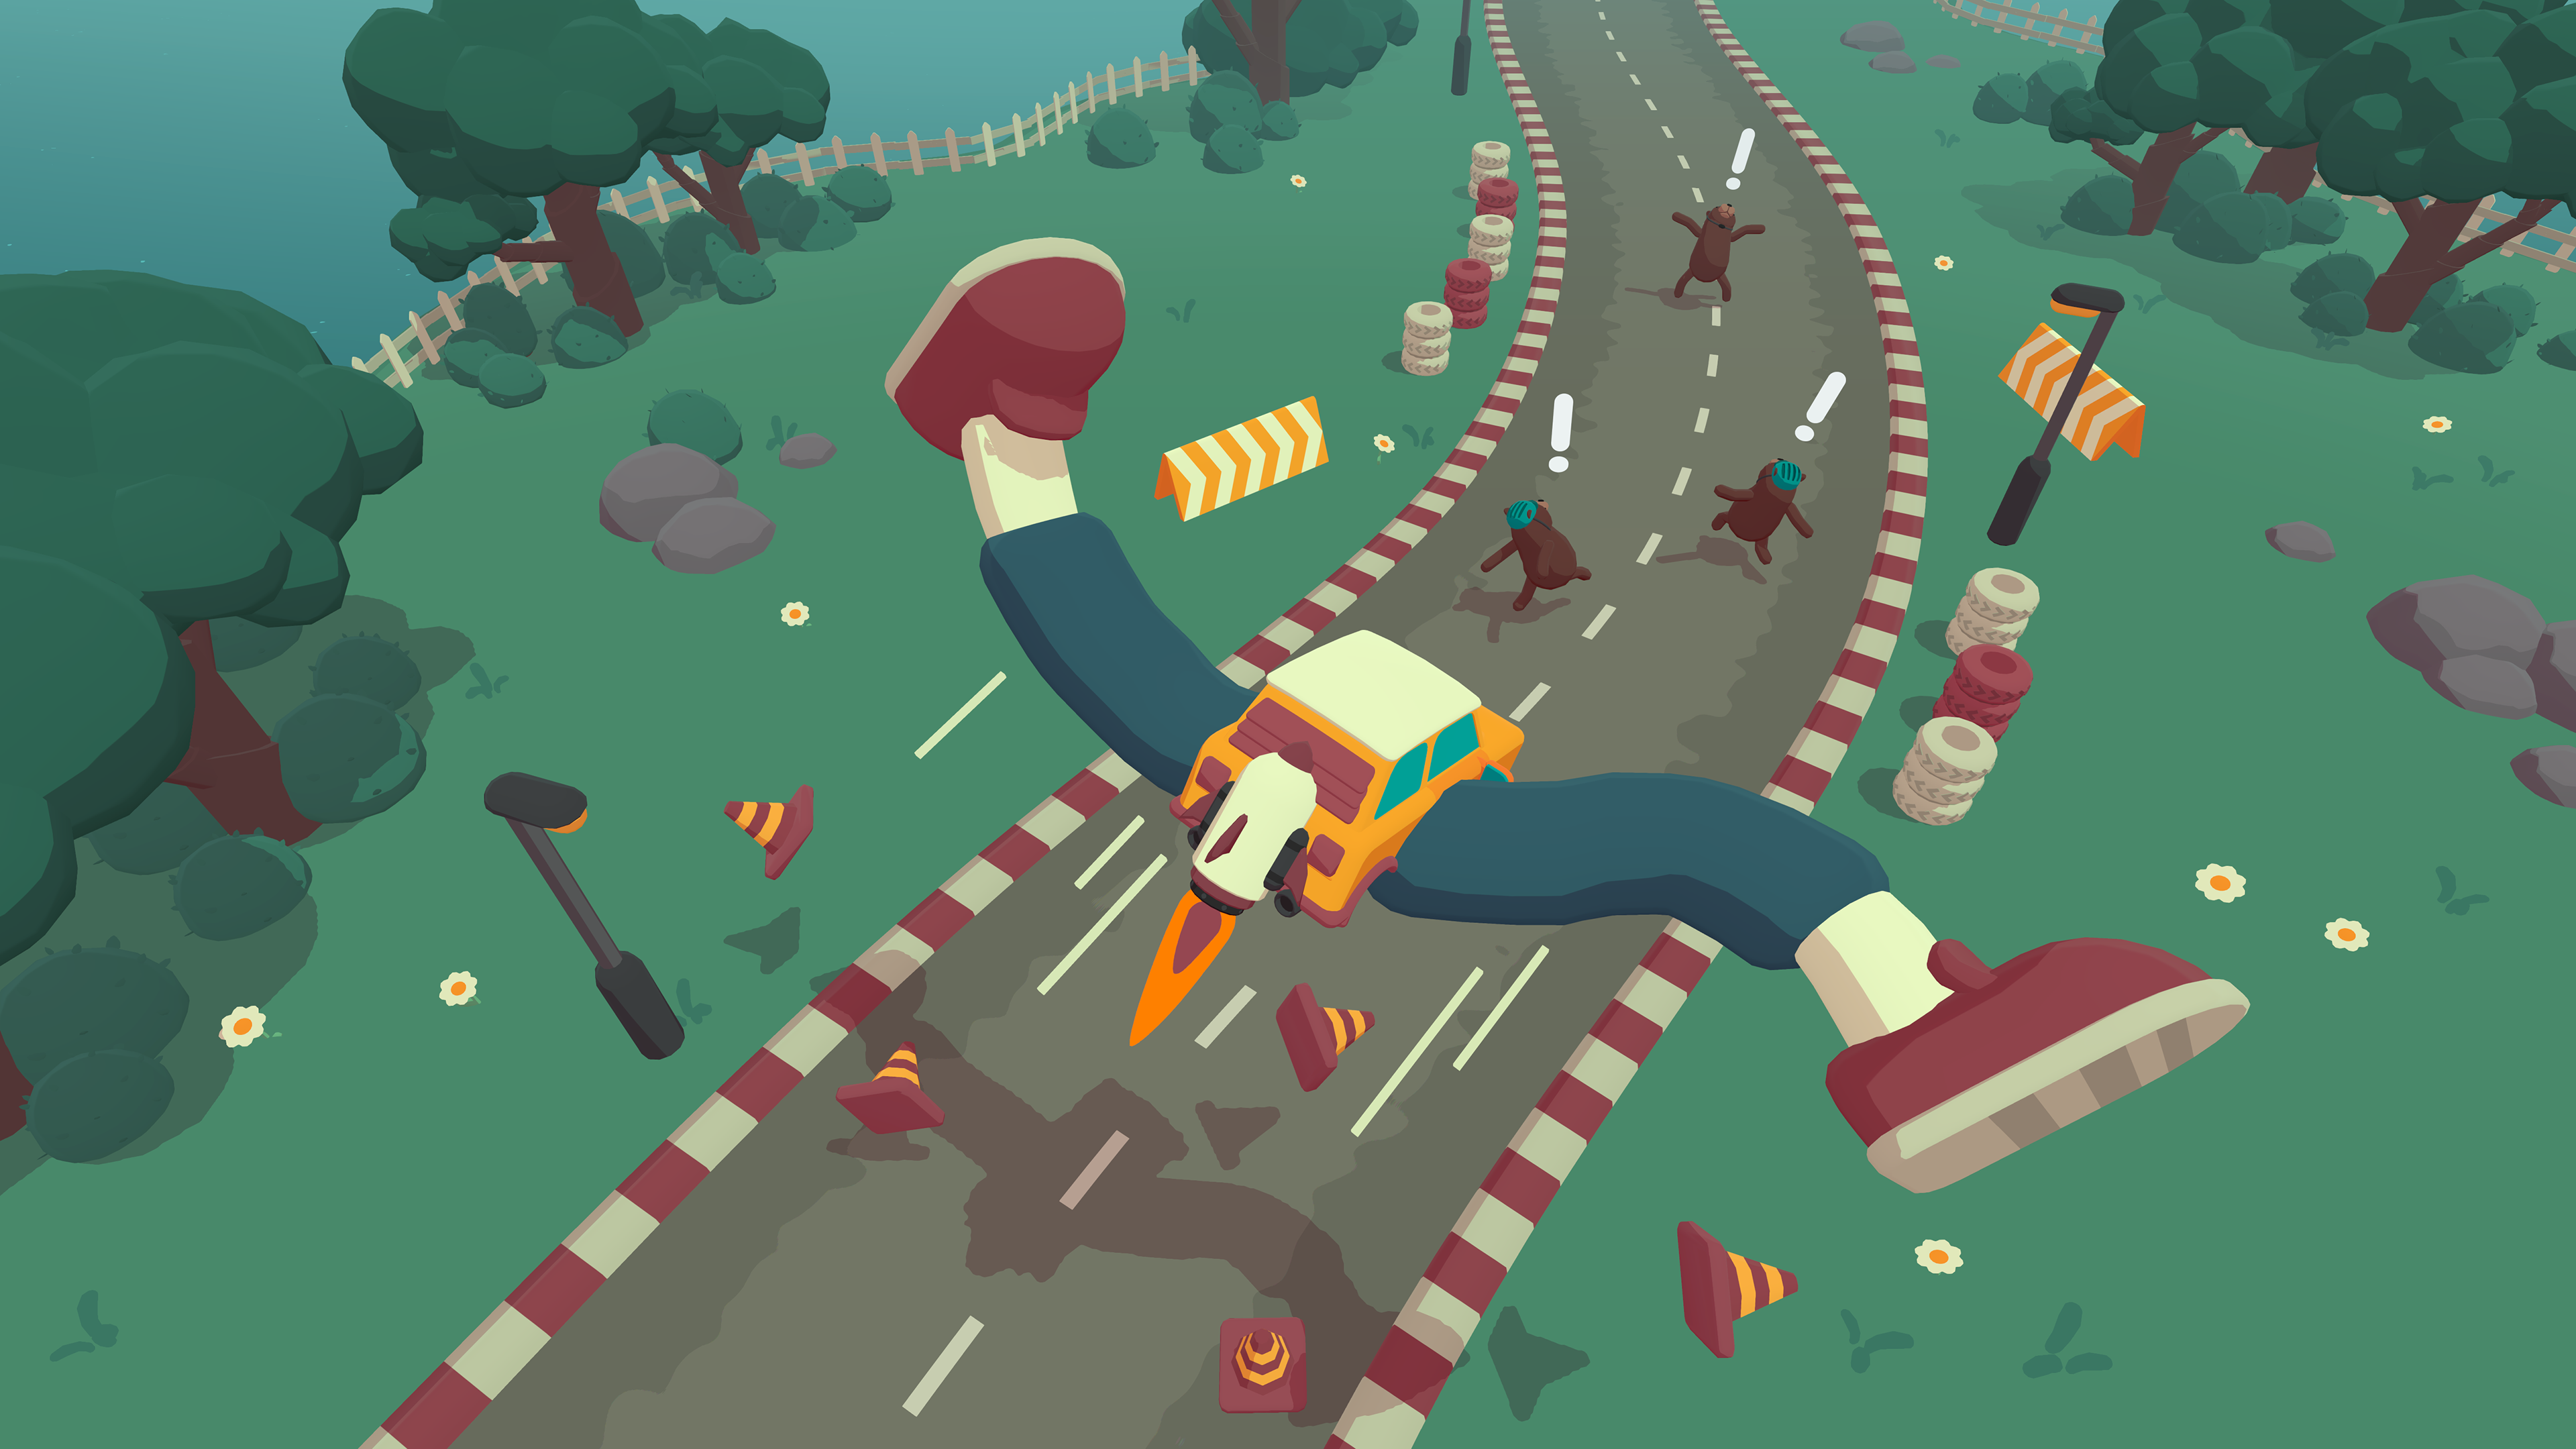 What the Car? was awarded Mobile Game of the Year at the 27th annual DICE Awards